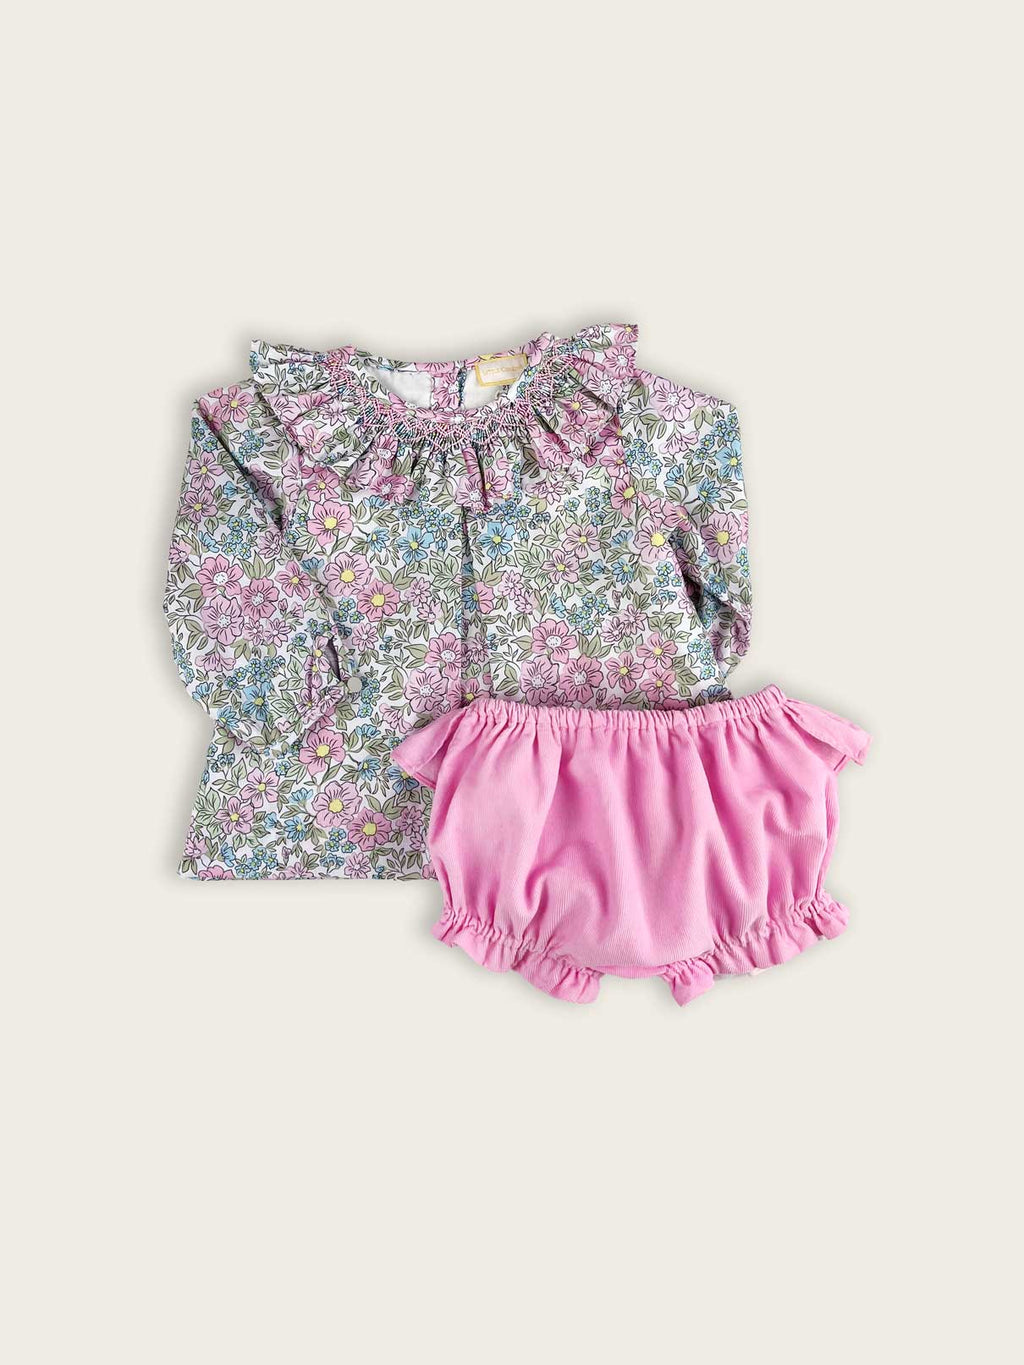 Floral baby and toddlers blouse with pink corduroy bloomers, featuring a frilled collar with hand smocking.